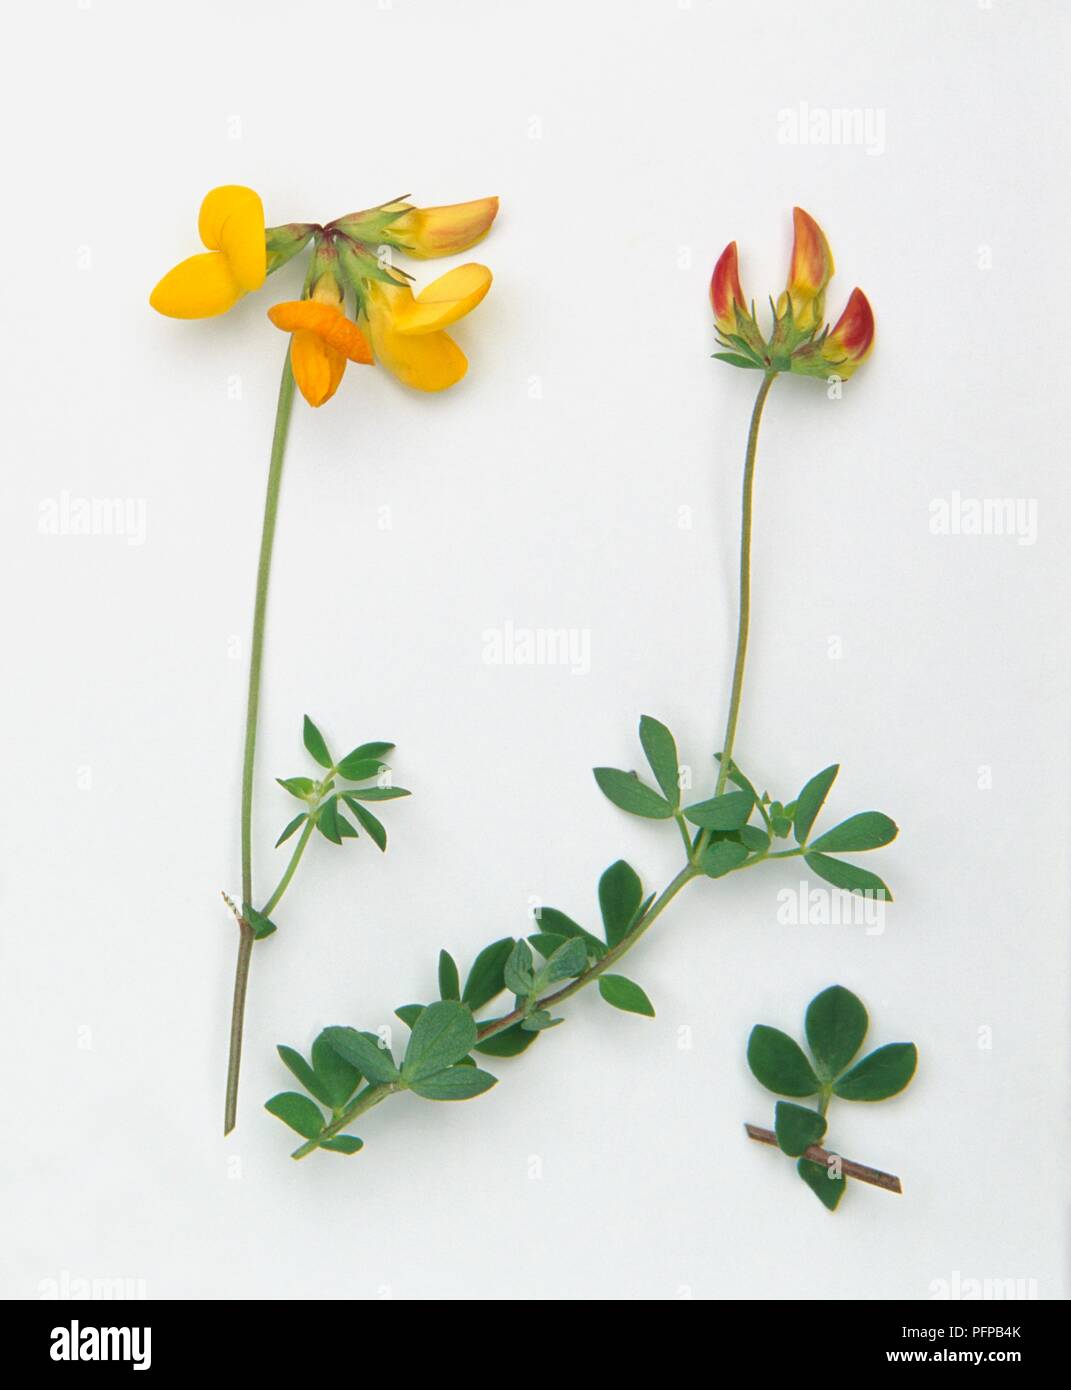 Lotus corniculatus (Bird's foot trefoil), stems with buds, flowers and leaves, and separated petals Stock Photo